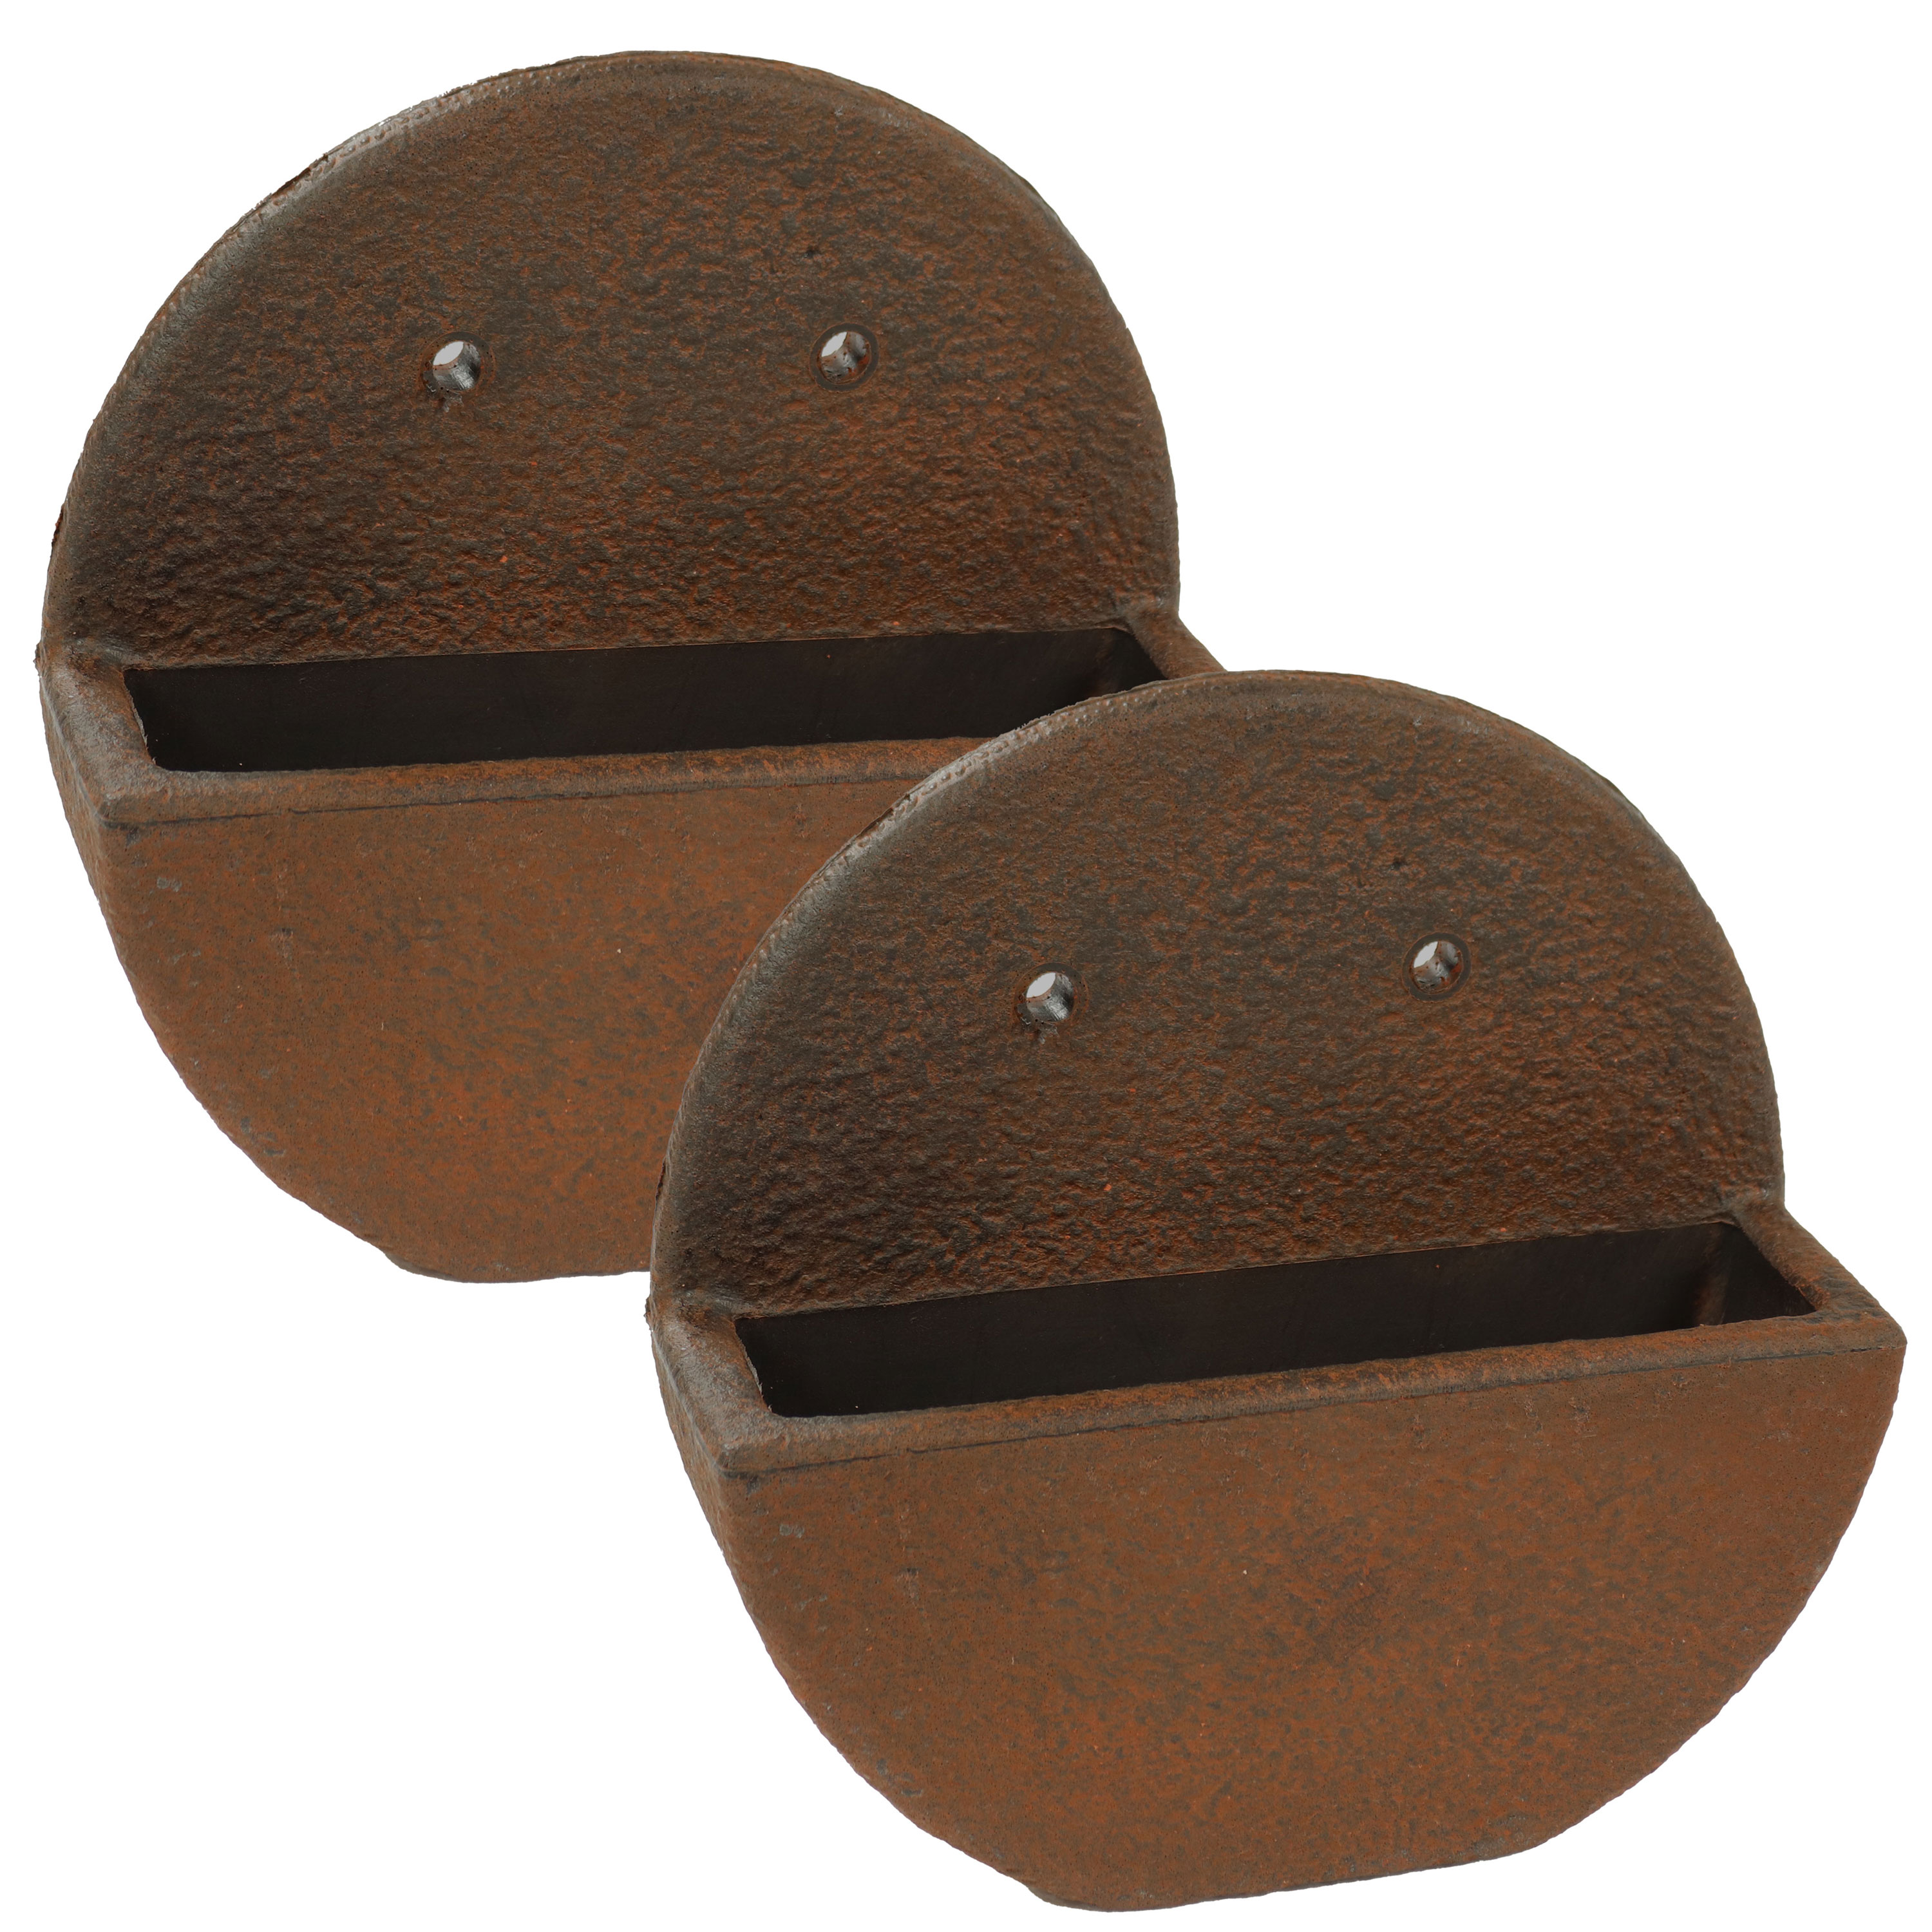 12 in Wall-Mounted Outdoor Planter - Dark Brown - Set of 2